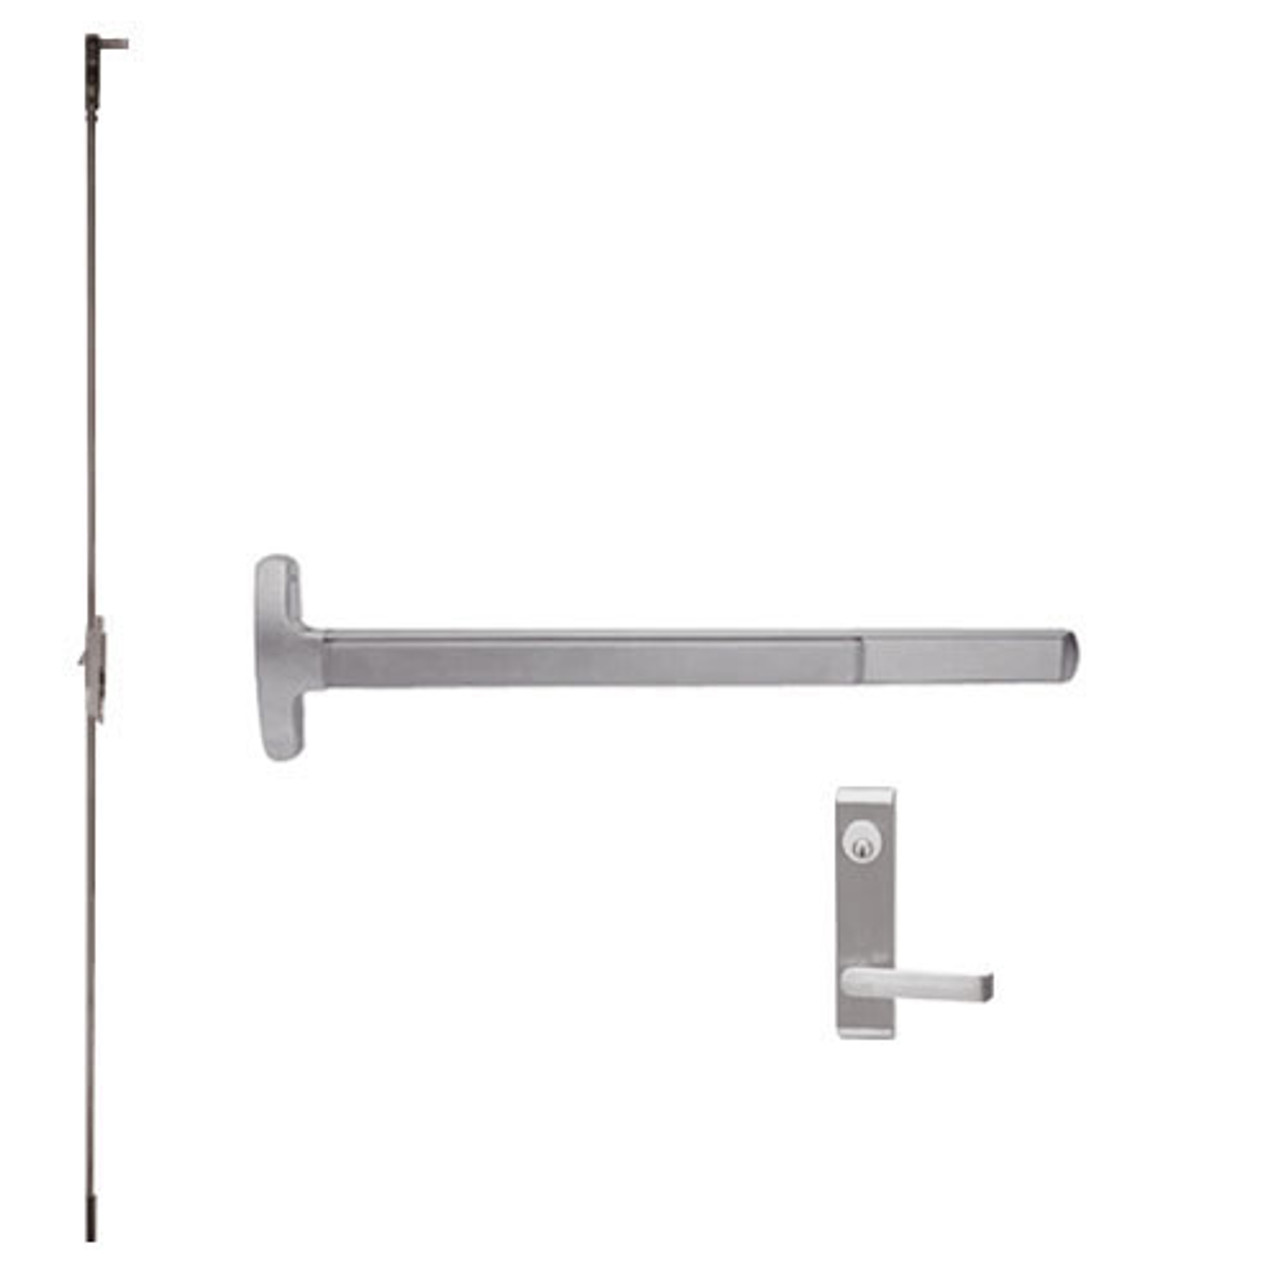 F-24-C-L-NL-DANE-US32D-3-LHR Falcon Exit Device in Satin Stainless Steel